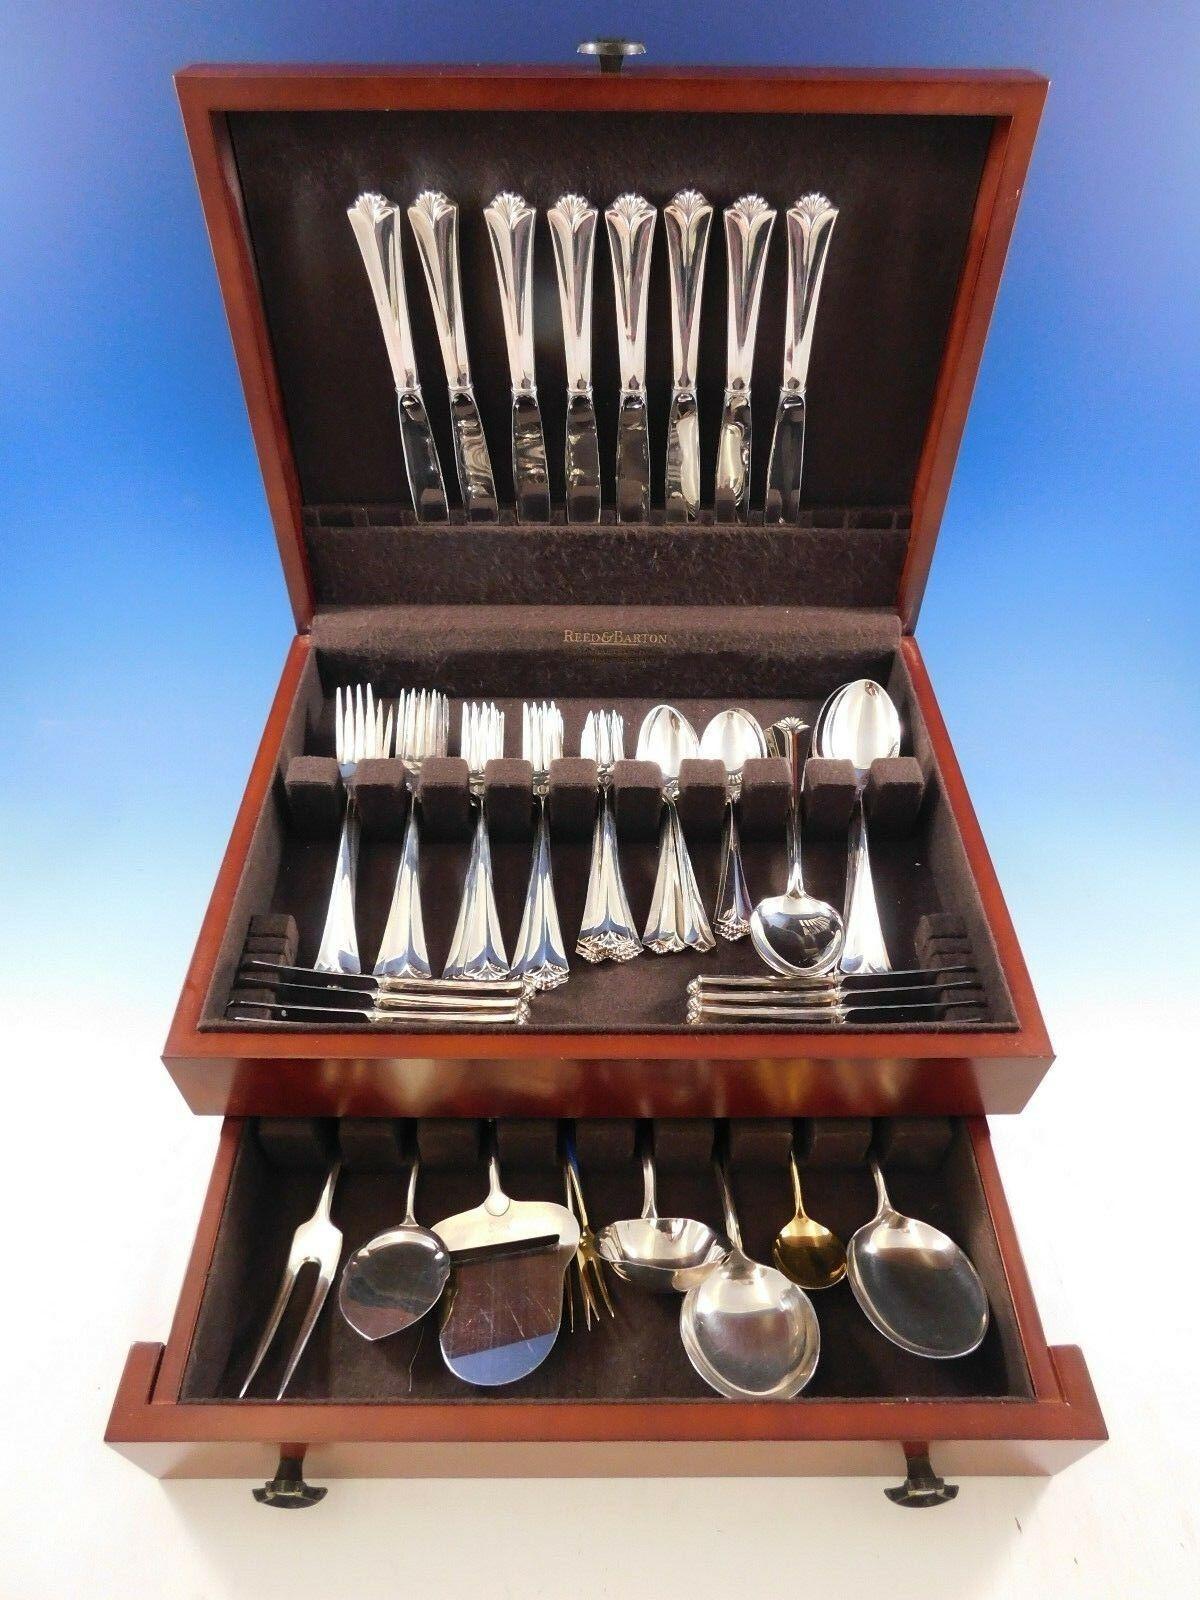 Townhall by David Andersen .830 Danish silver flatware set, 65 pieces.
Name of pattern: Radhus med Vifte (translates to 'city hall with fan design)
This set includes:

8 dinner knives, 9 3/8